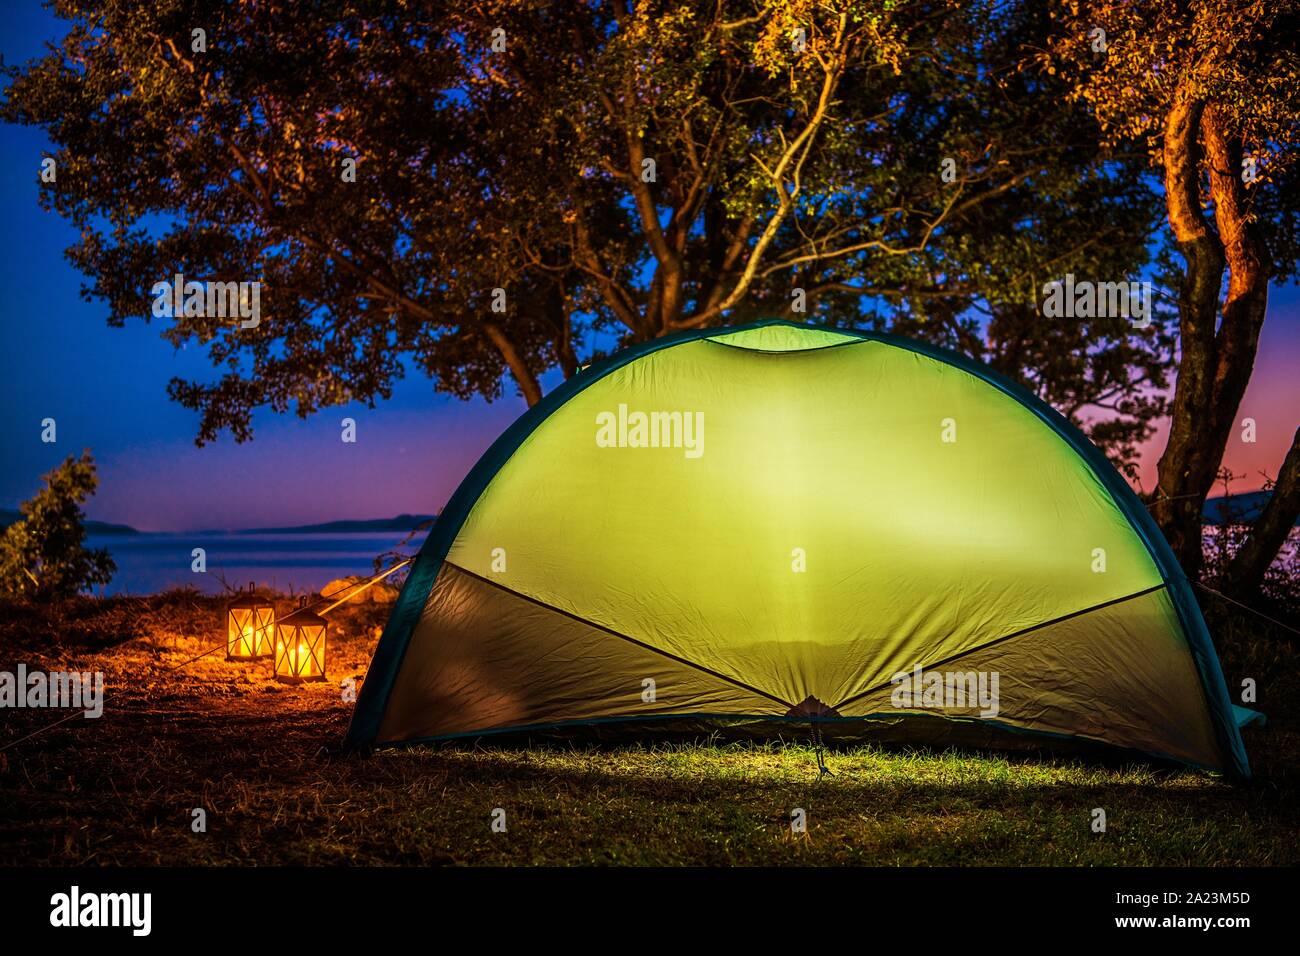 Sea Front Tent Camping. Glowing Light Inside Small Modern Tent. Campground and Outdoor Theme. Stock Photo